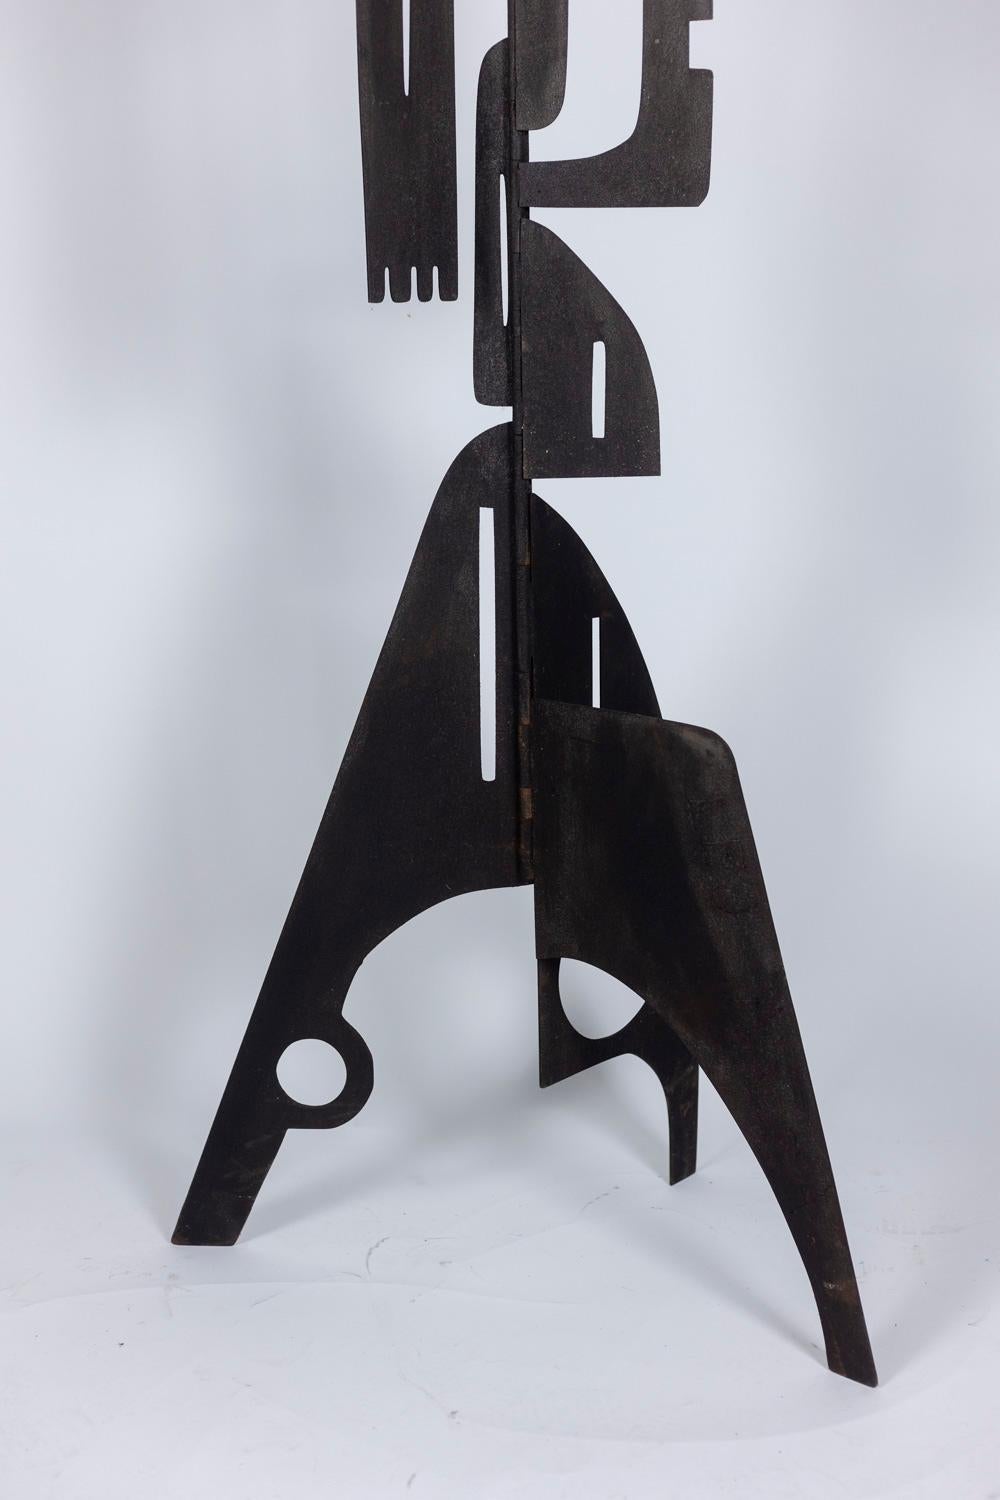 French Léo Pacha, Sculpture Un Metal, Contemporary Work For Sale